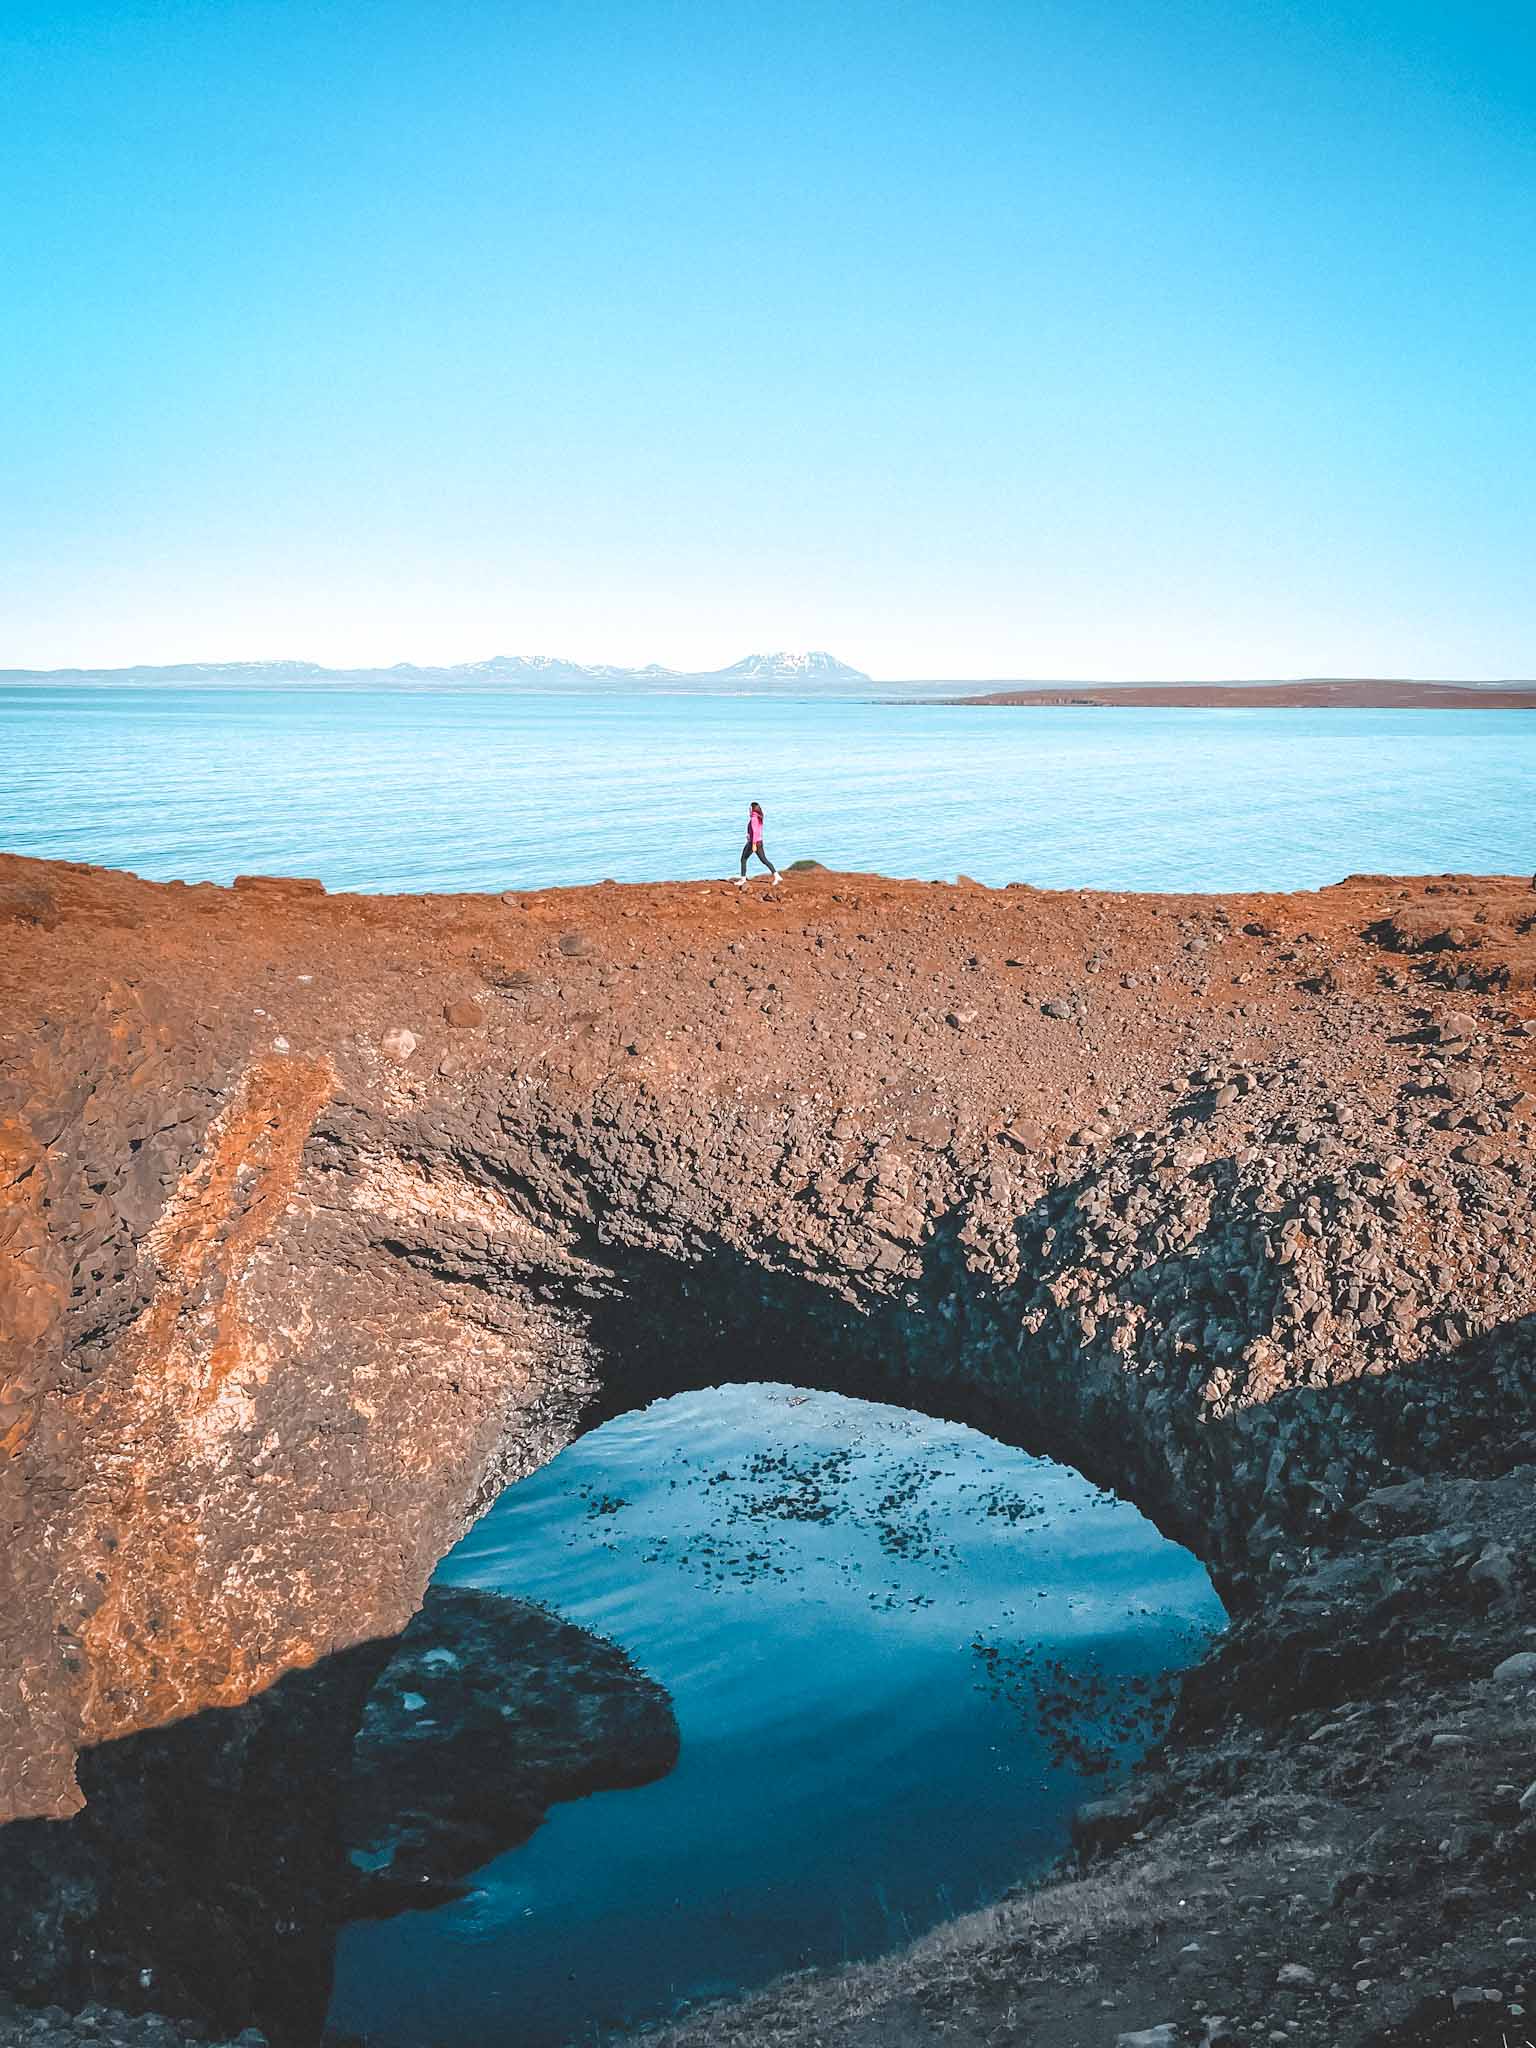 Natural stone arches in Iceland - Rauðanes coastal arch